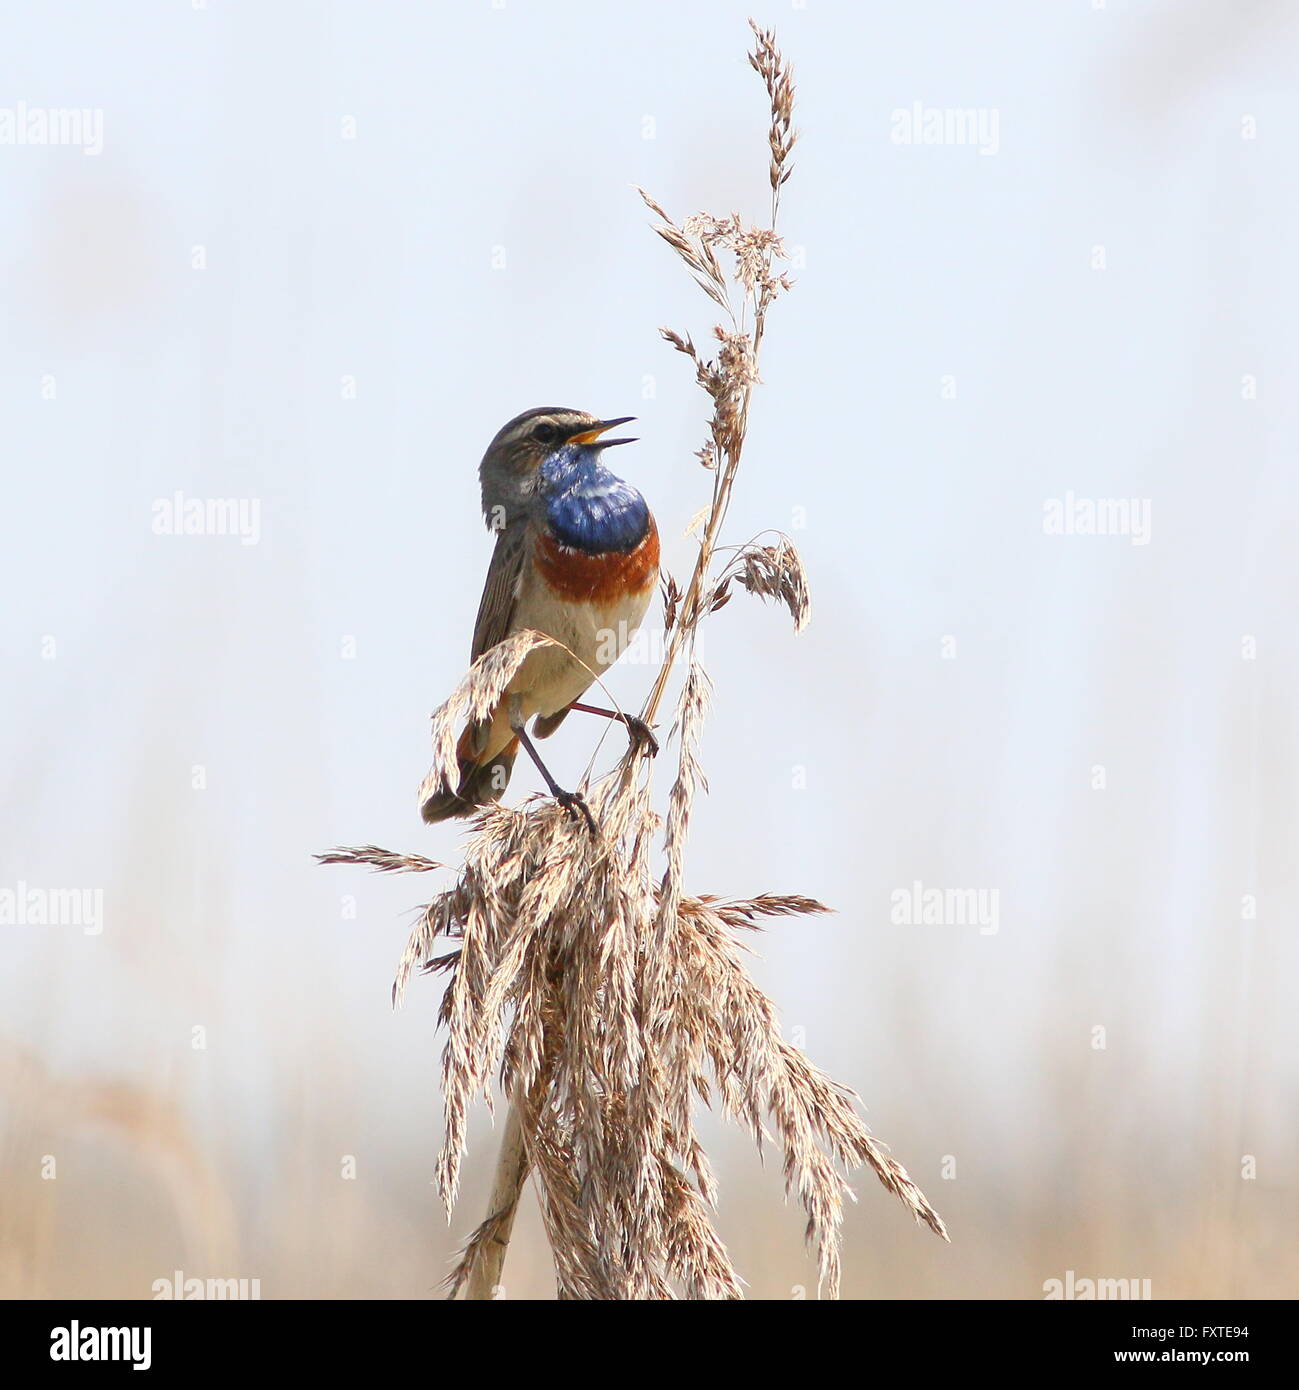 Male European White spotted Bluethroat (Luscinia svecica cyanecula) in song Stock Photo